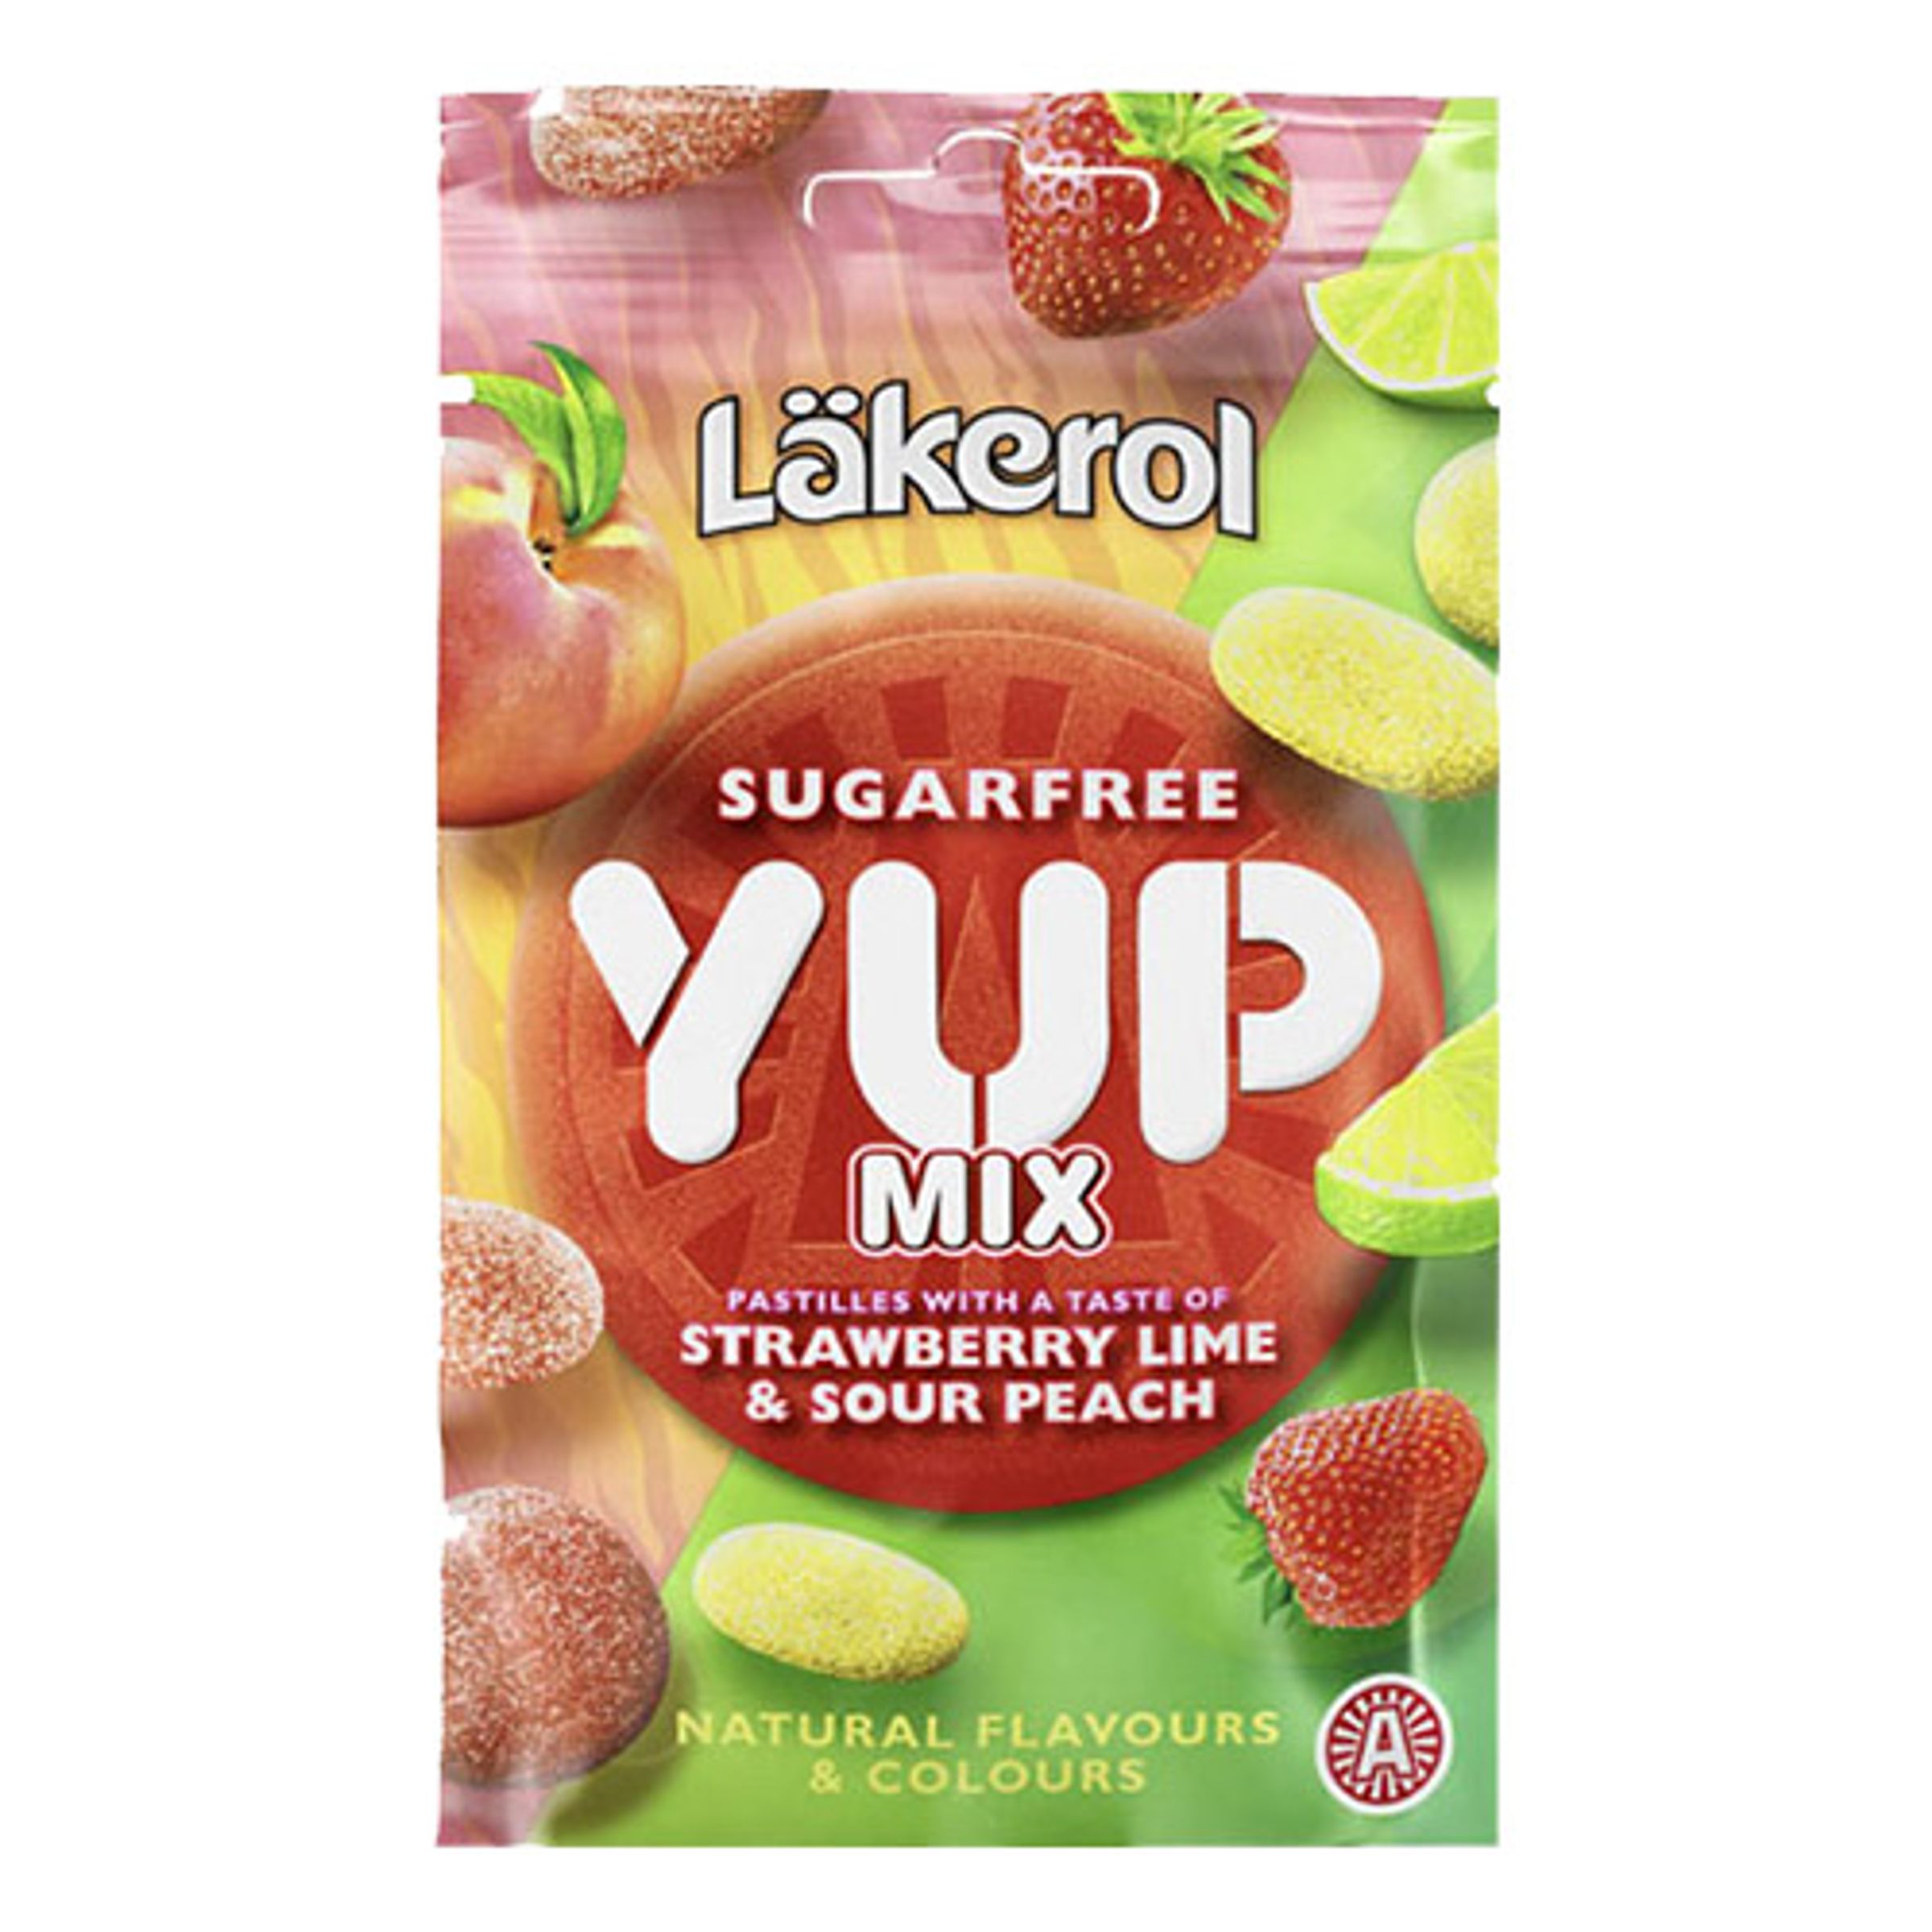 Läkerol Yup Mix Sour Peach & Strawberry/Lime - 1-pack